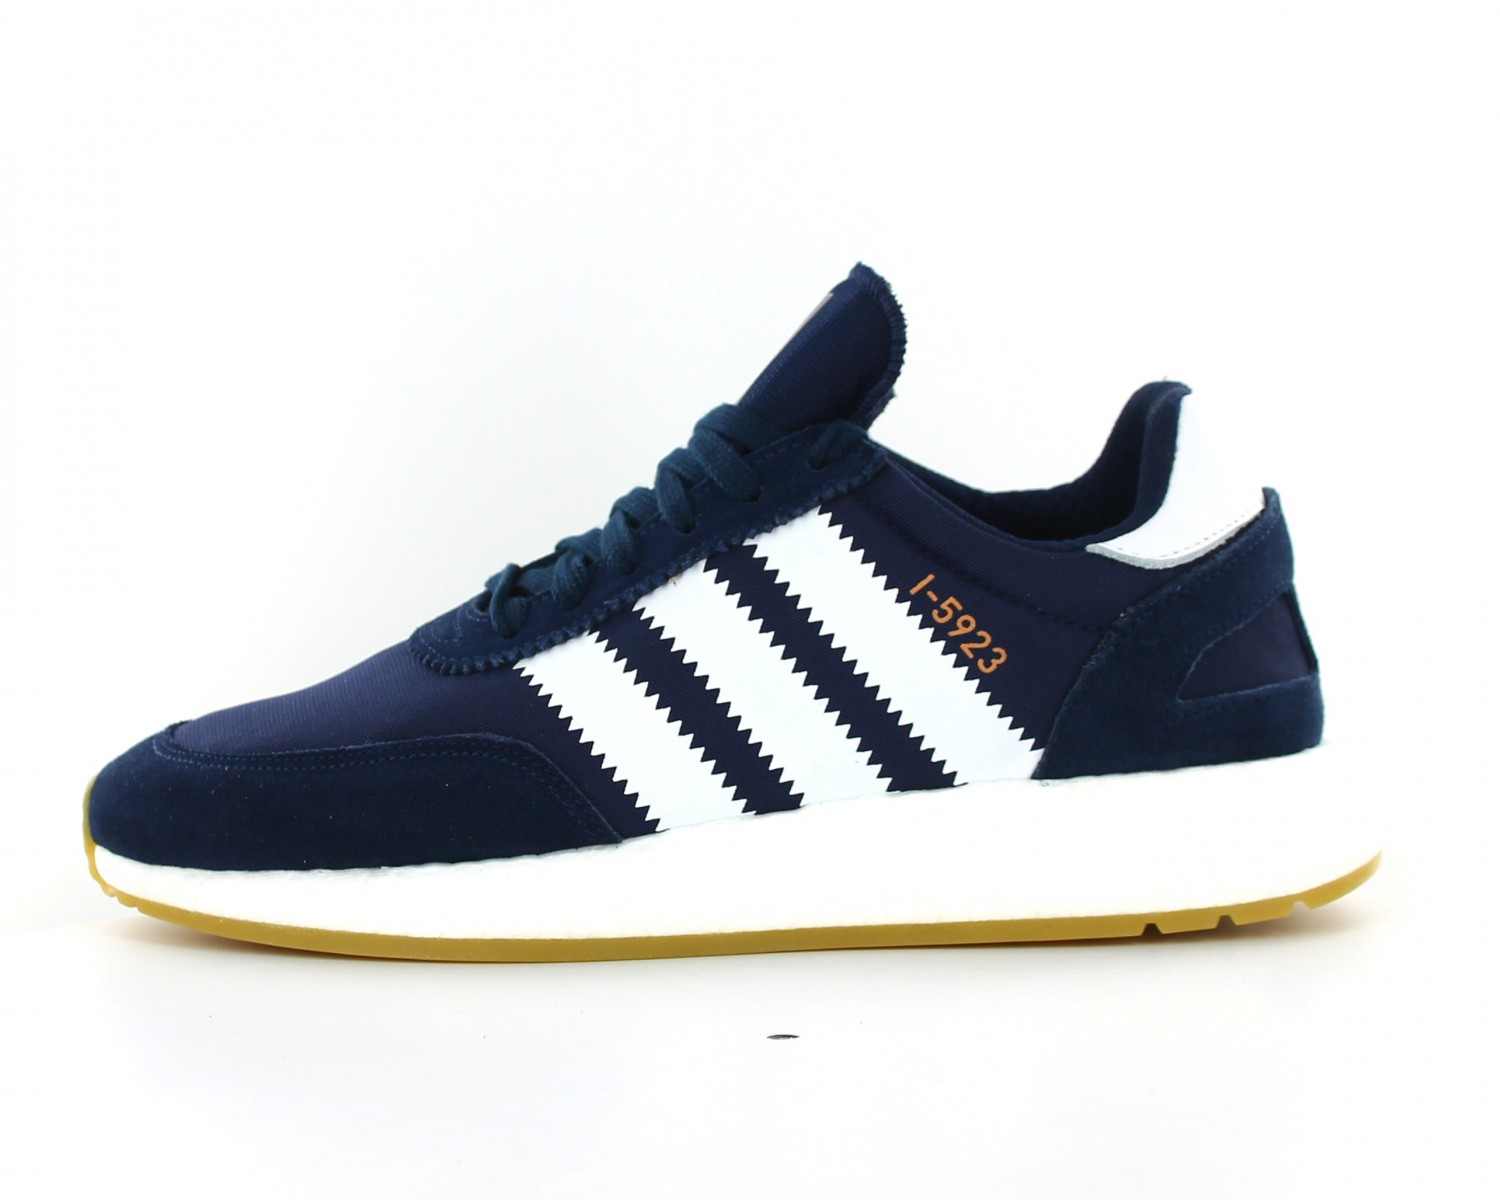 adidas iniki sold out